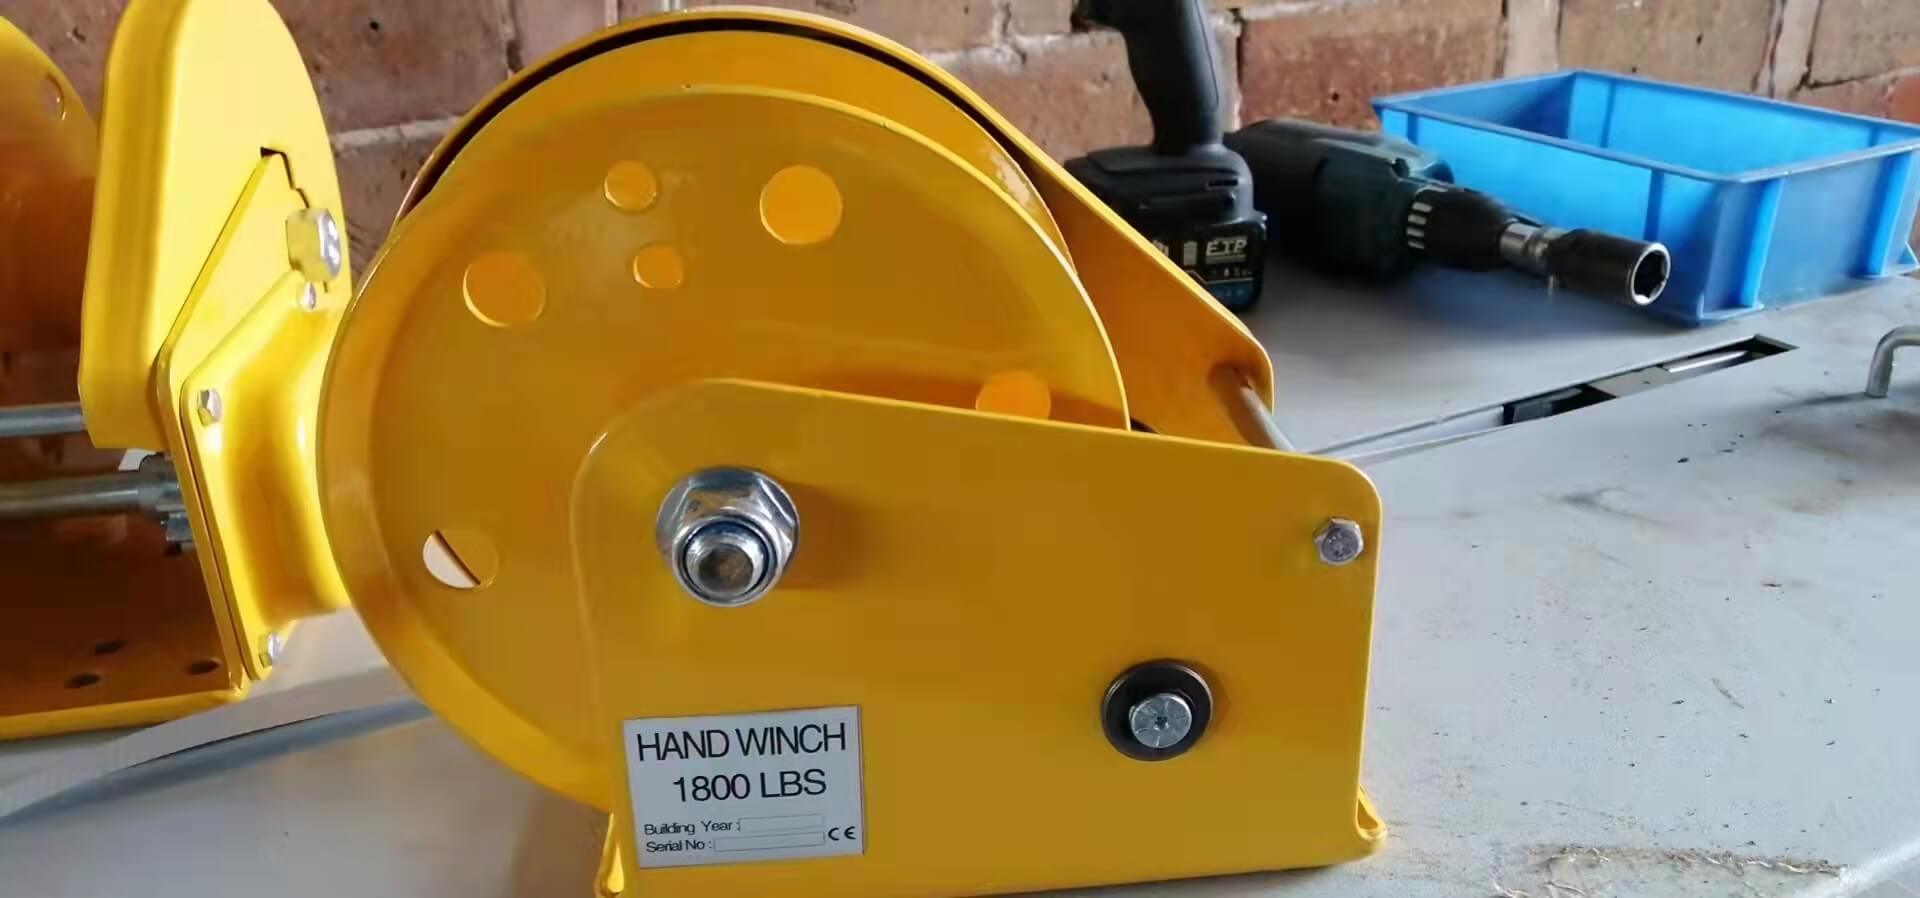 Site photos of Manual Winch 1200LBS with SELF LOCK + Manual Winch 1800LBS with SELF LOCK made in china-3.jpg